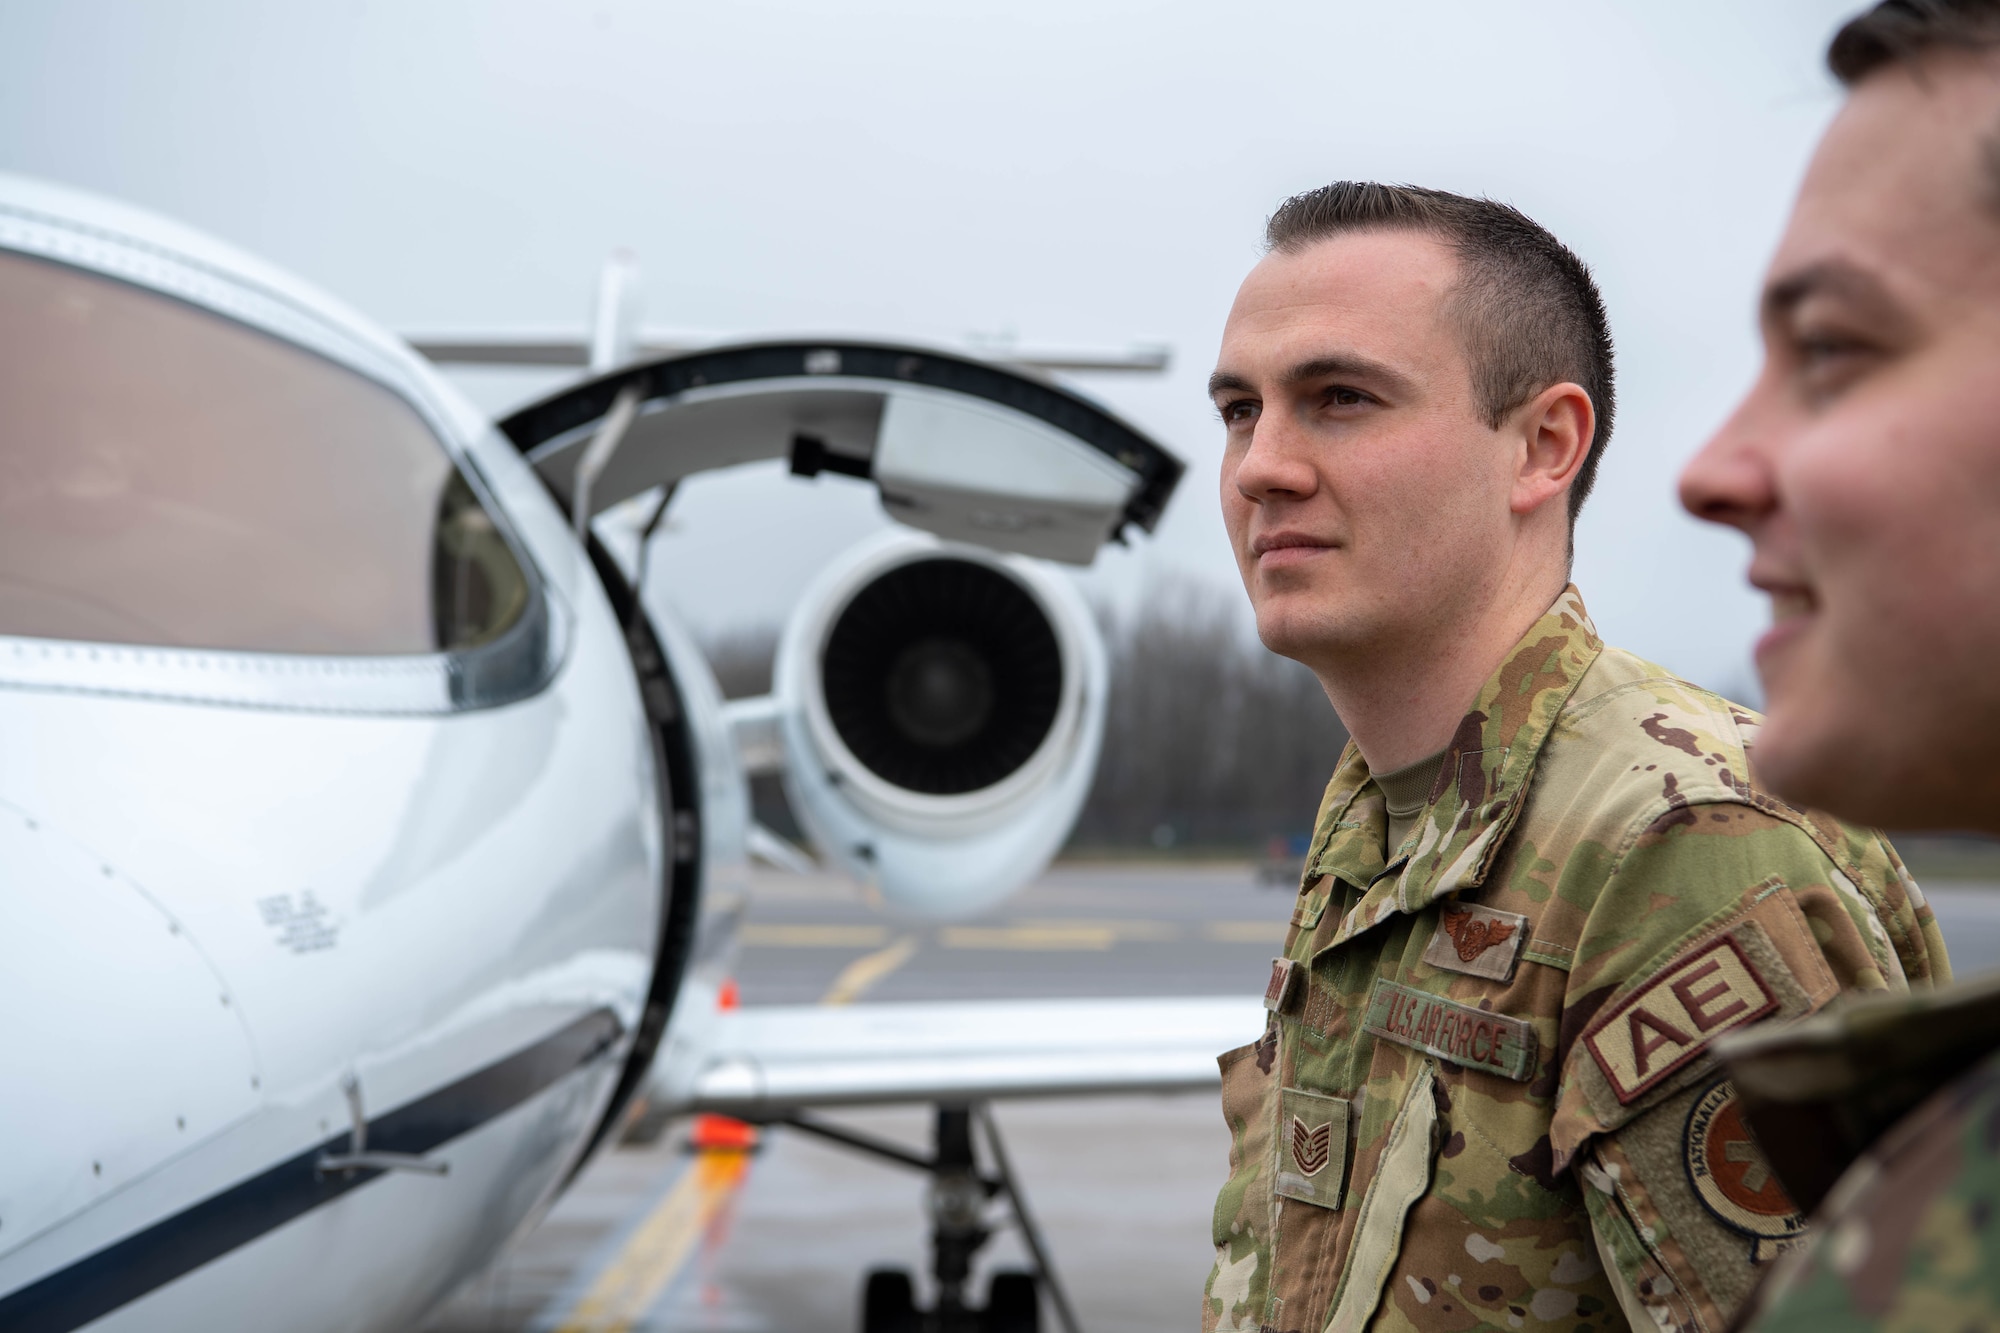 Tech. Sgt. Brendon Bowman, 86th Aeromedical Evacuation Squadron flight examiner and emergency medical paramedic, waits for a patient to arrive at Vilnius International Airport, Lithuania, April 6, 2023.